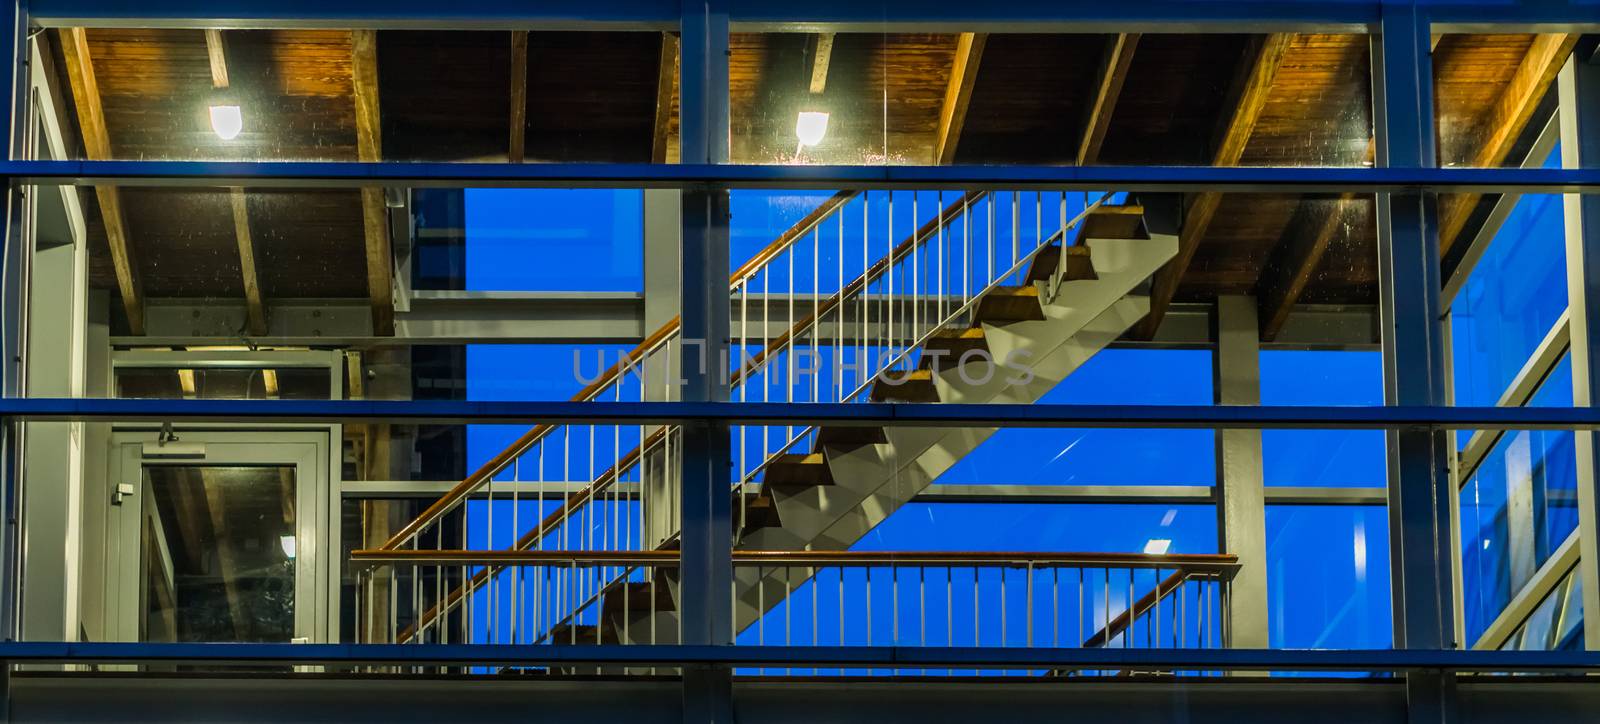 Stairs in a modern staircase building with glass windows, lighted at night, dutch architecture